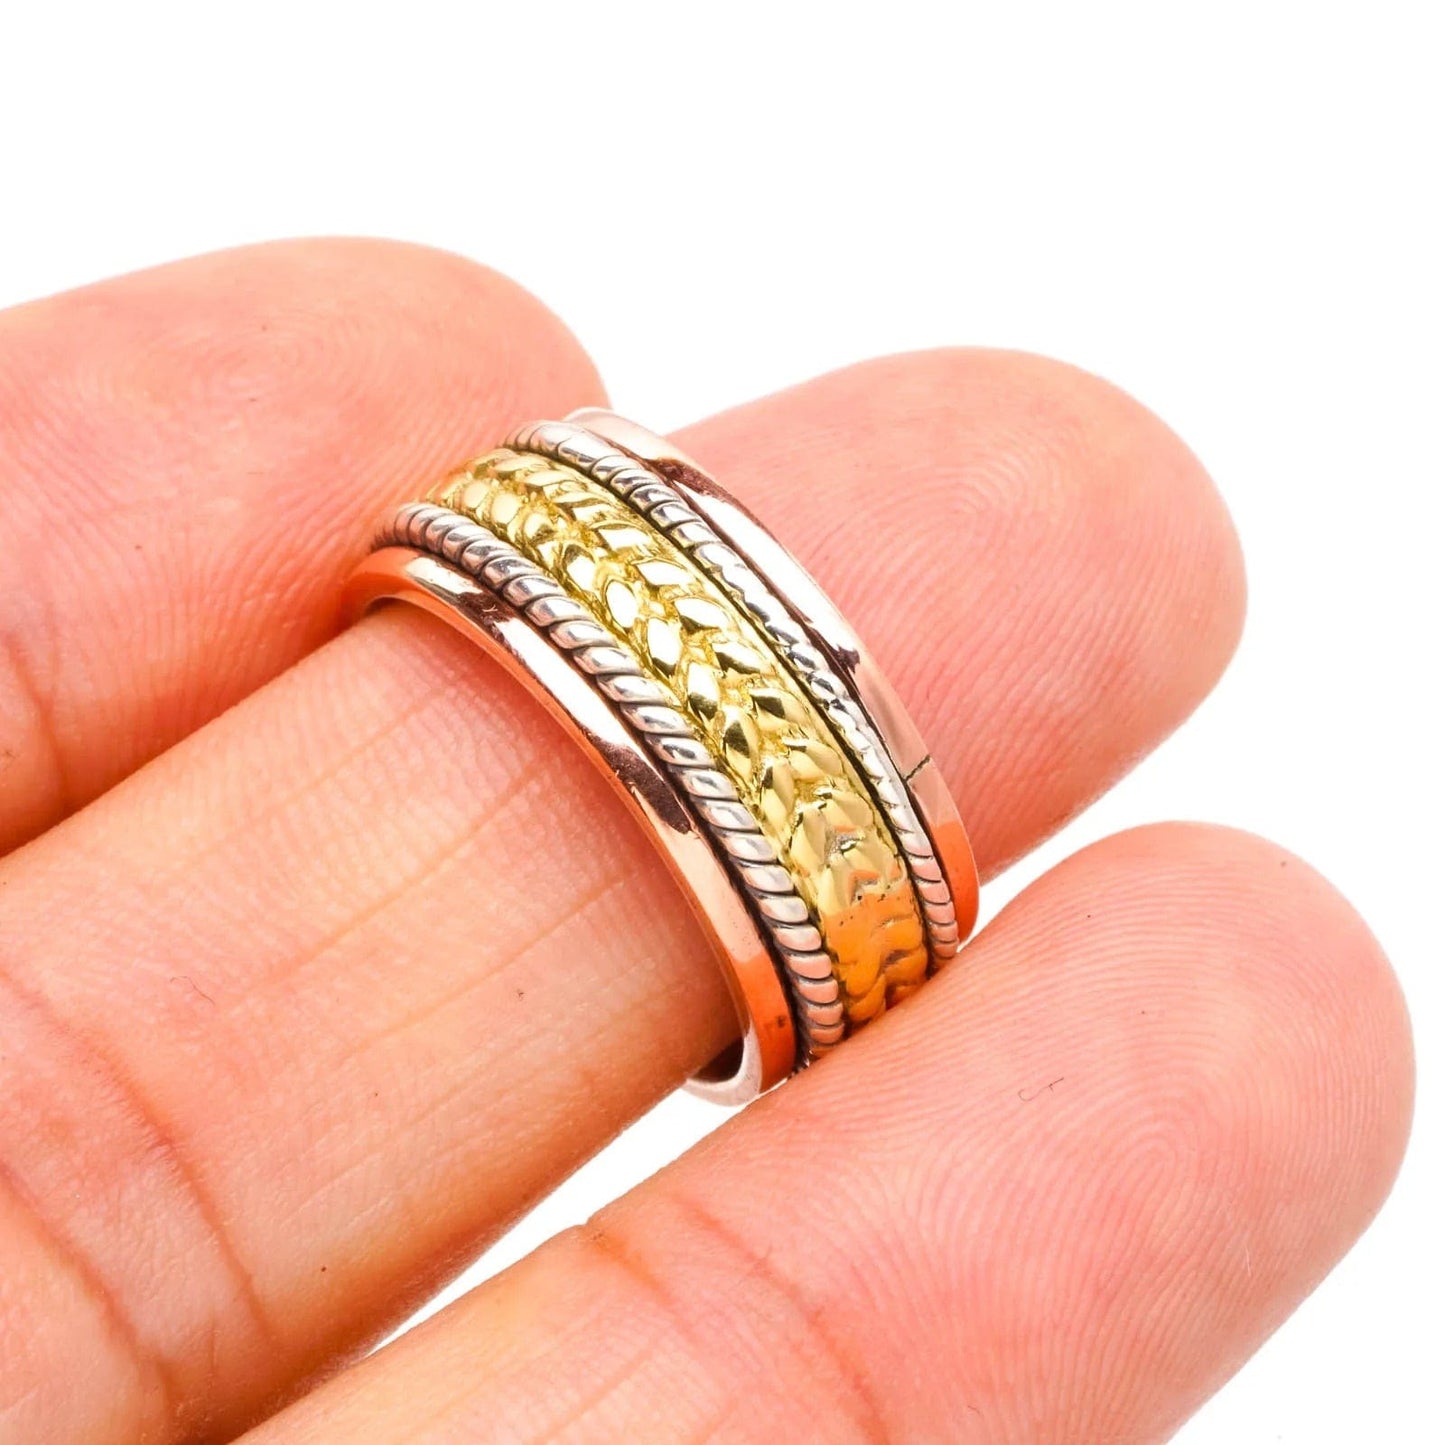 Courage Meditation Ring - The Mindful Collection Solid .925 Sterling Silver Two Tone Braid Band Spinner Ring